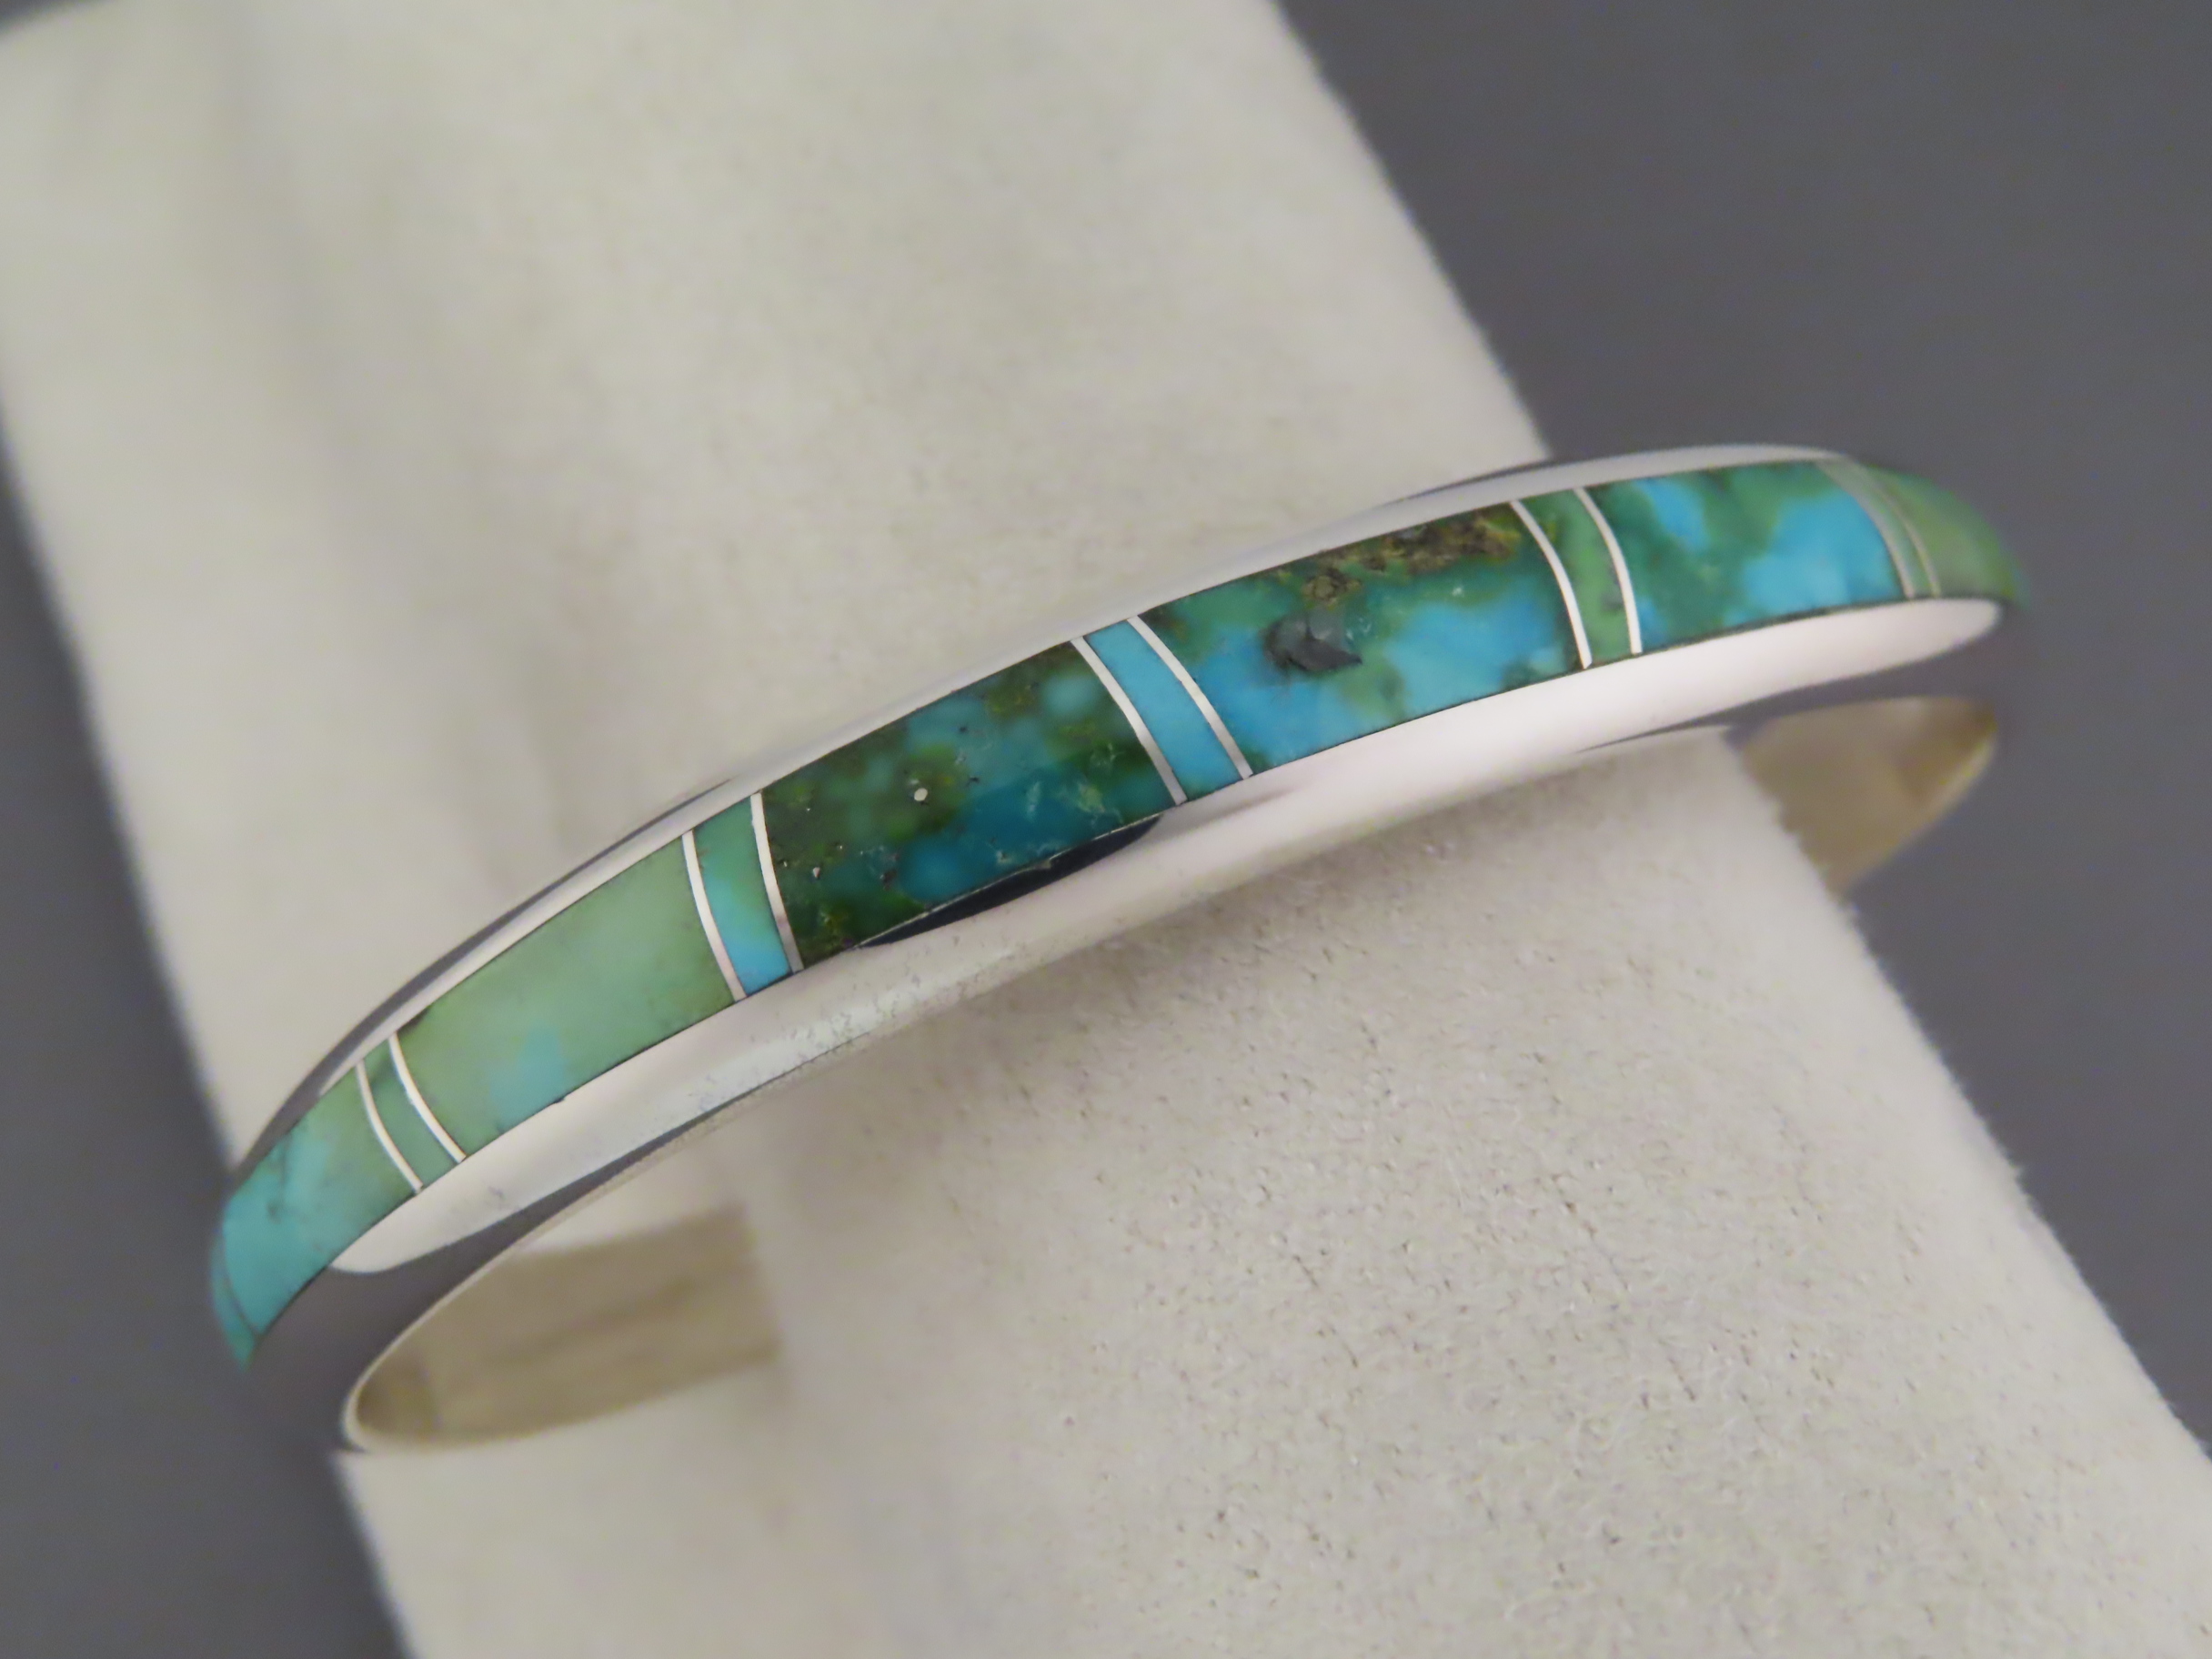 Turquoise Inlay Cuff Bracelet (Sonoran Gold Turquoise)